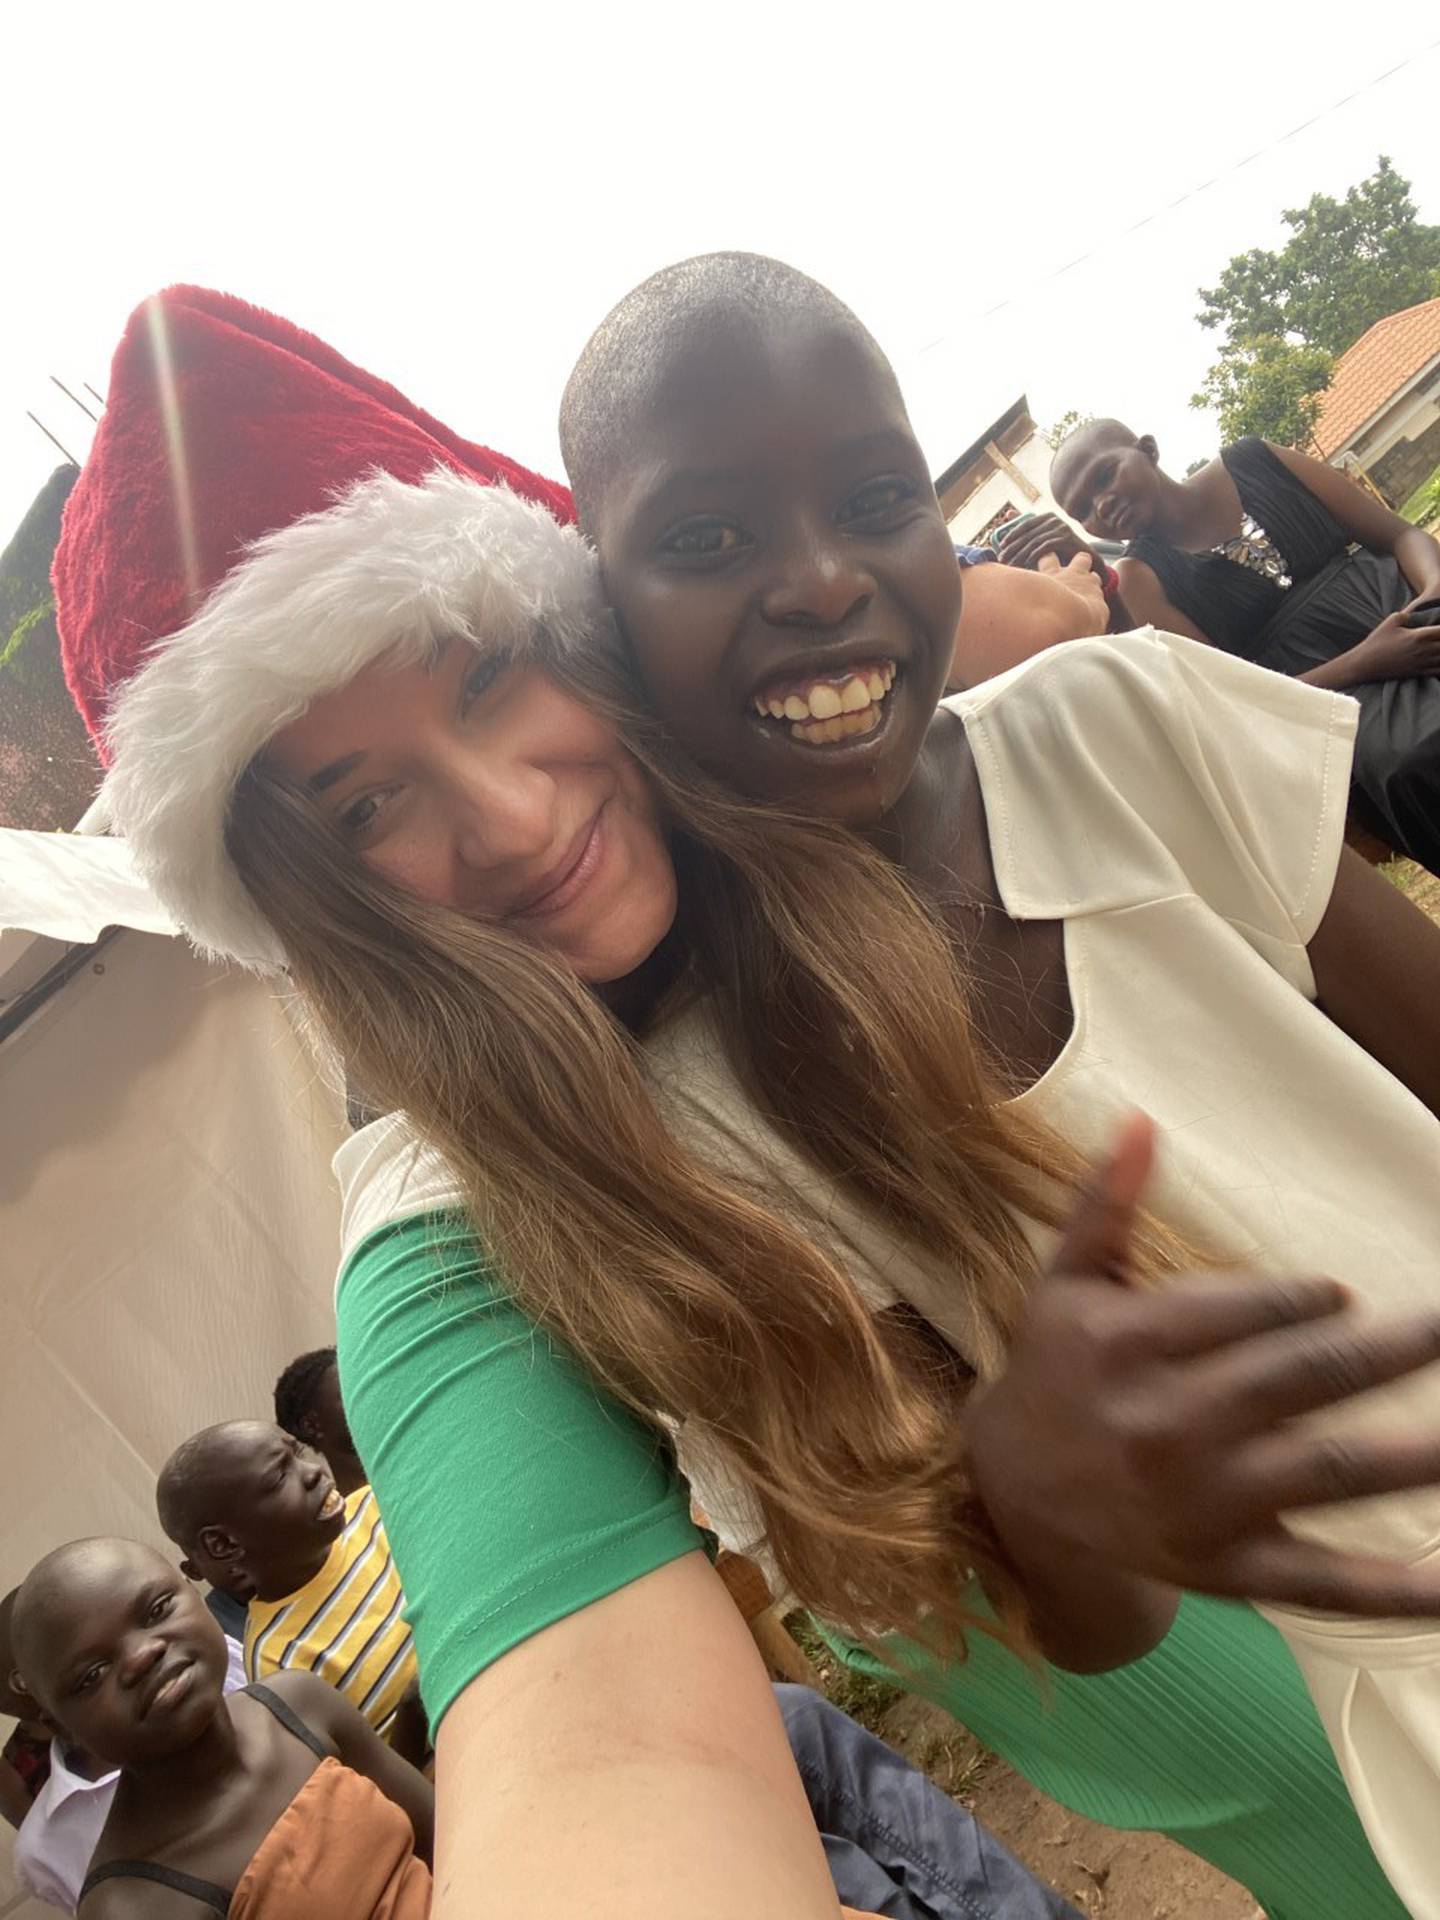 Betsy Murray of New Lenox, a special education teacher at Joliet Central, High School, has spent two of her vacations serving special needs orphans in Uganda. In between her trips, Murray raises money for their orphanage.